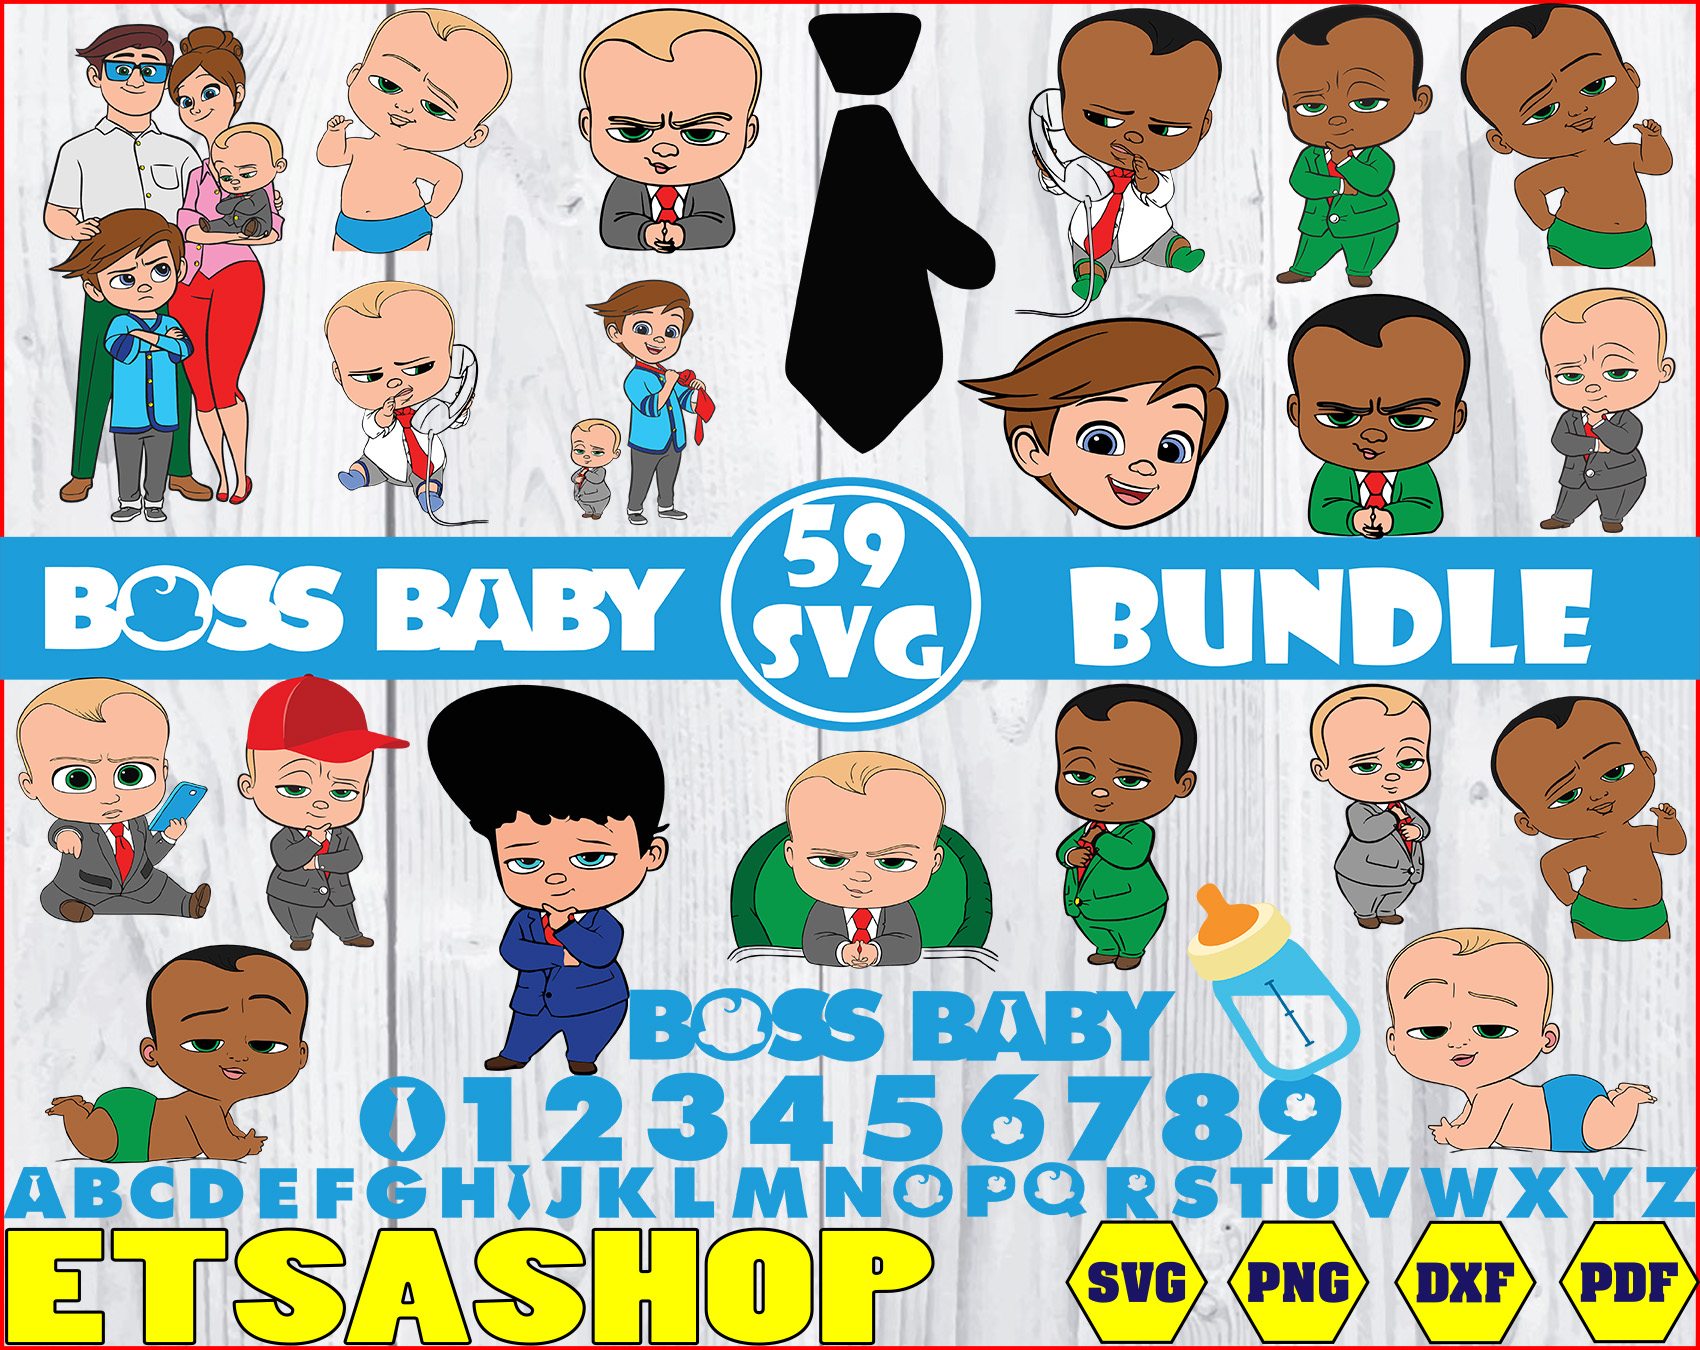 Download The Boss Baby Svg Bundle Cut Files The Boss Baby Logo Svg The Boss Baby Clipart Cricut Clipart Digital Download Outstanding And Different